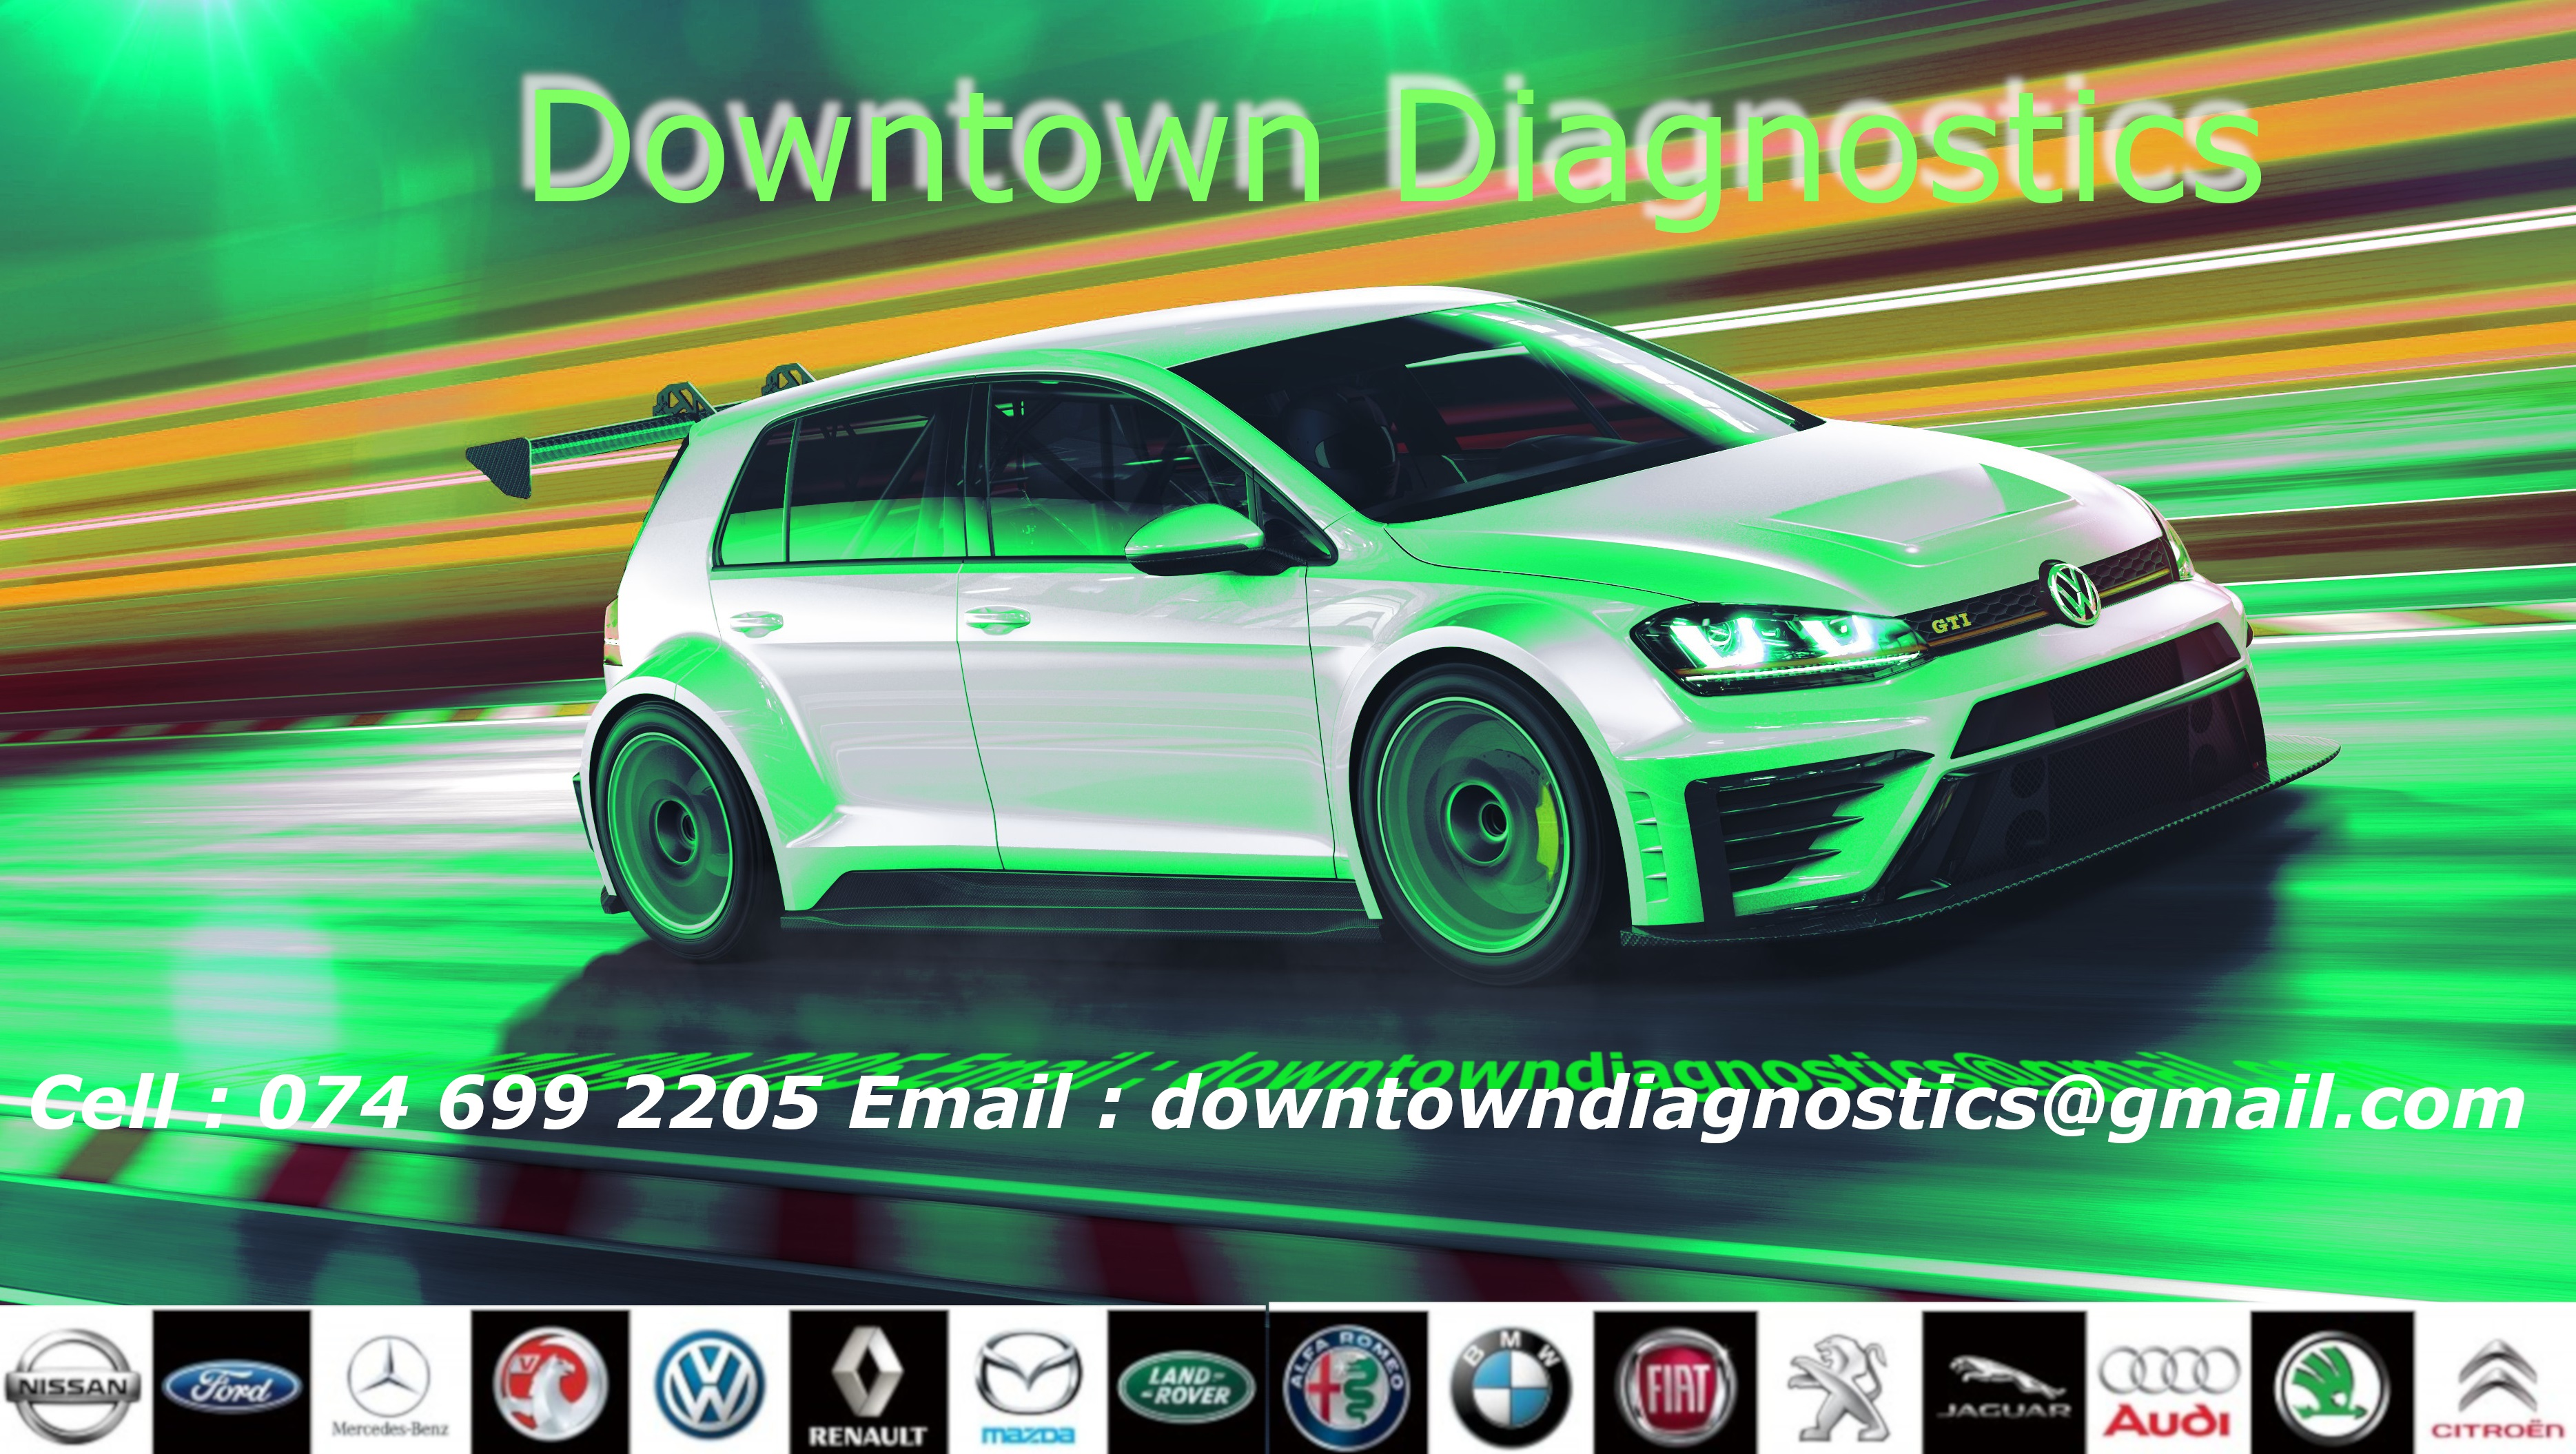 Diagnostics to all makes of vehicles